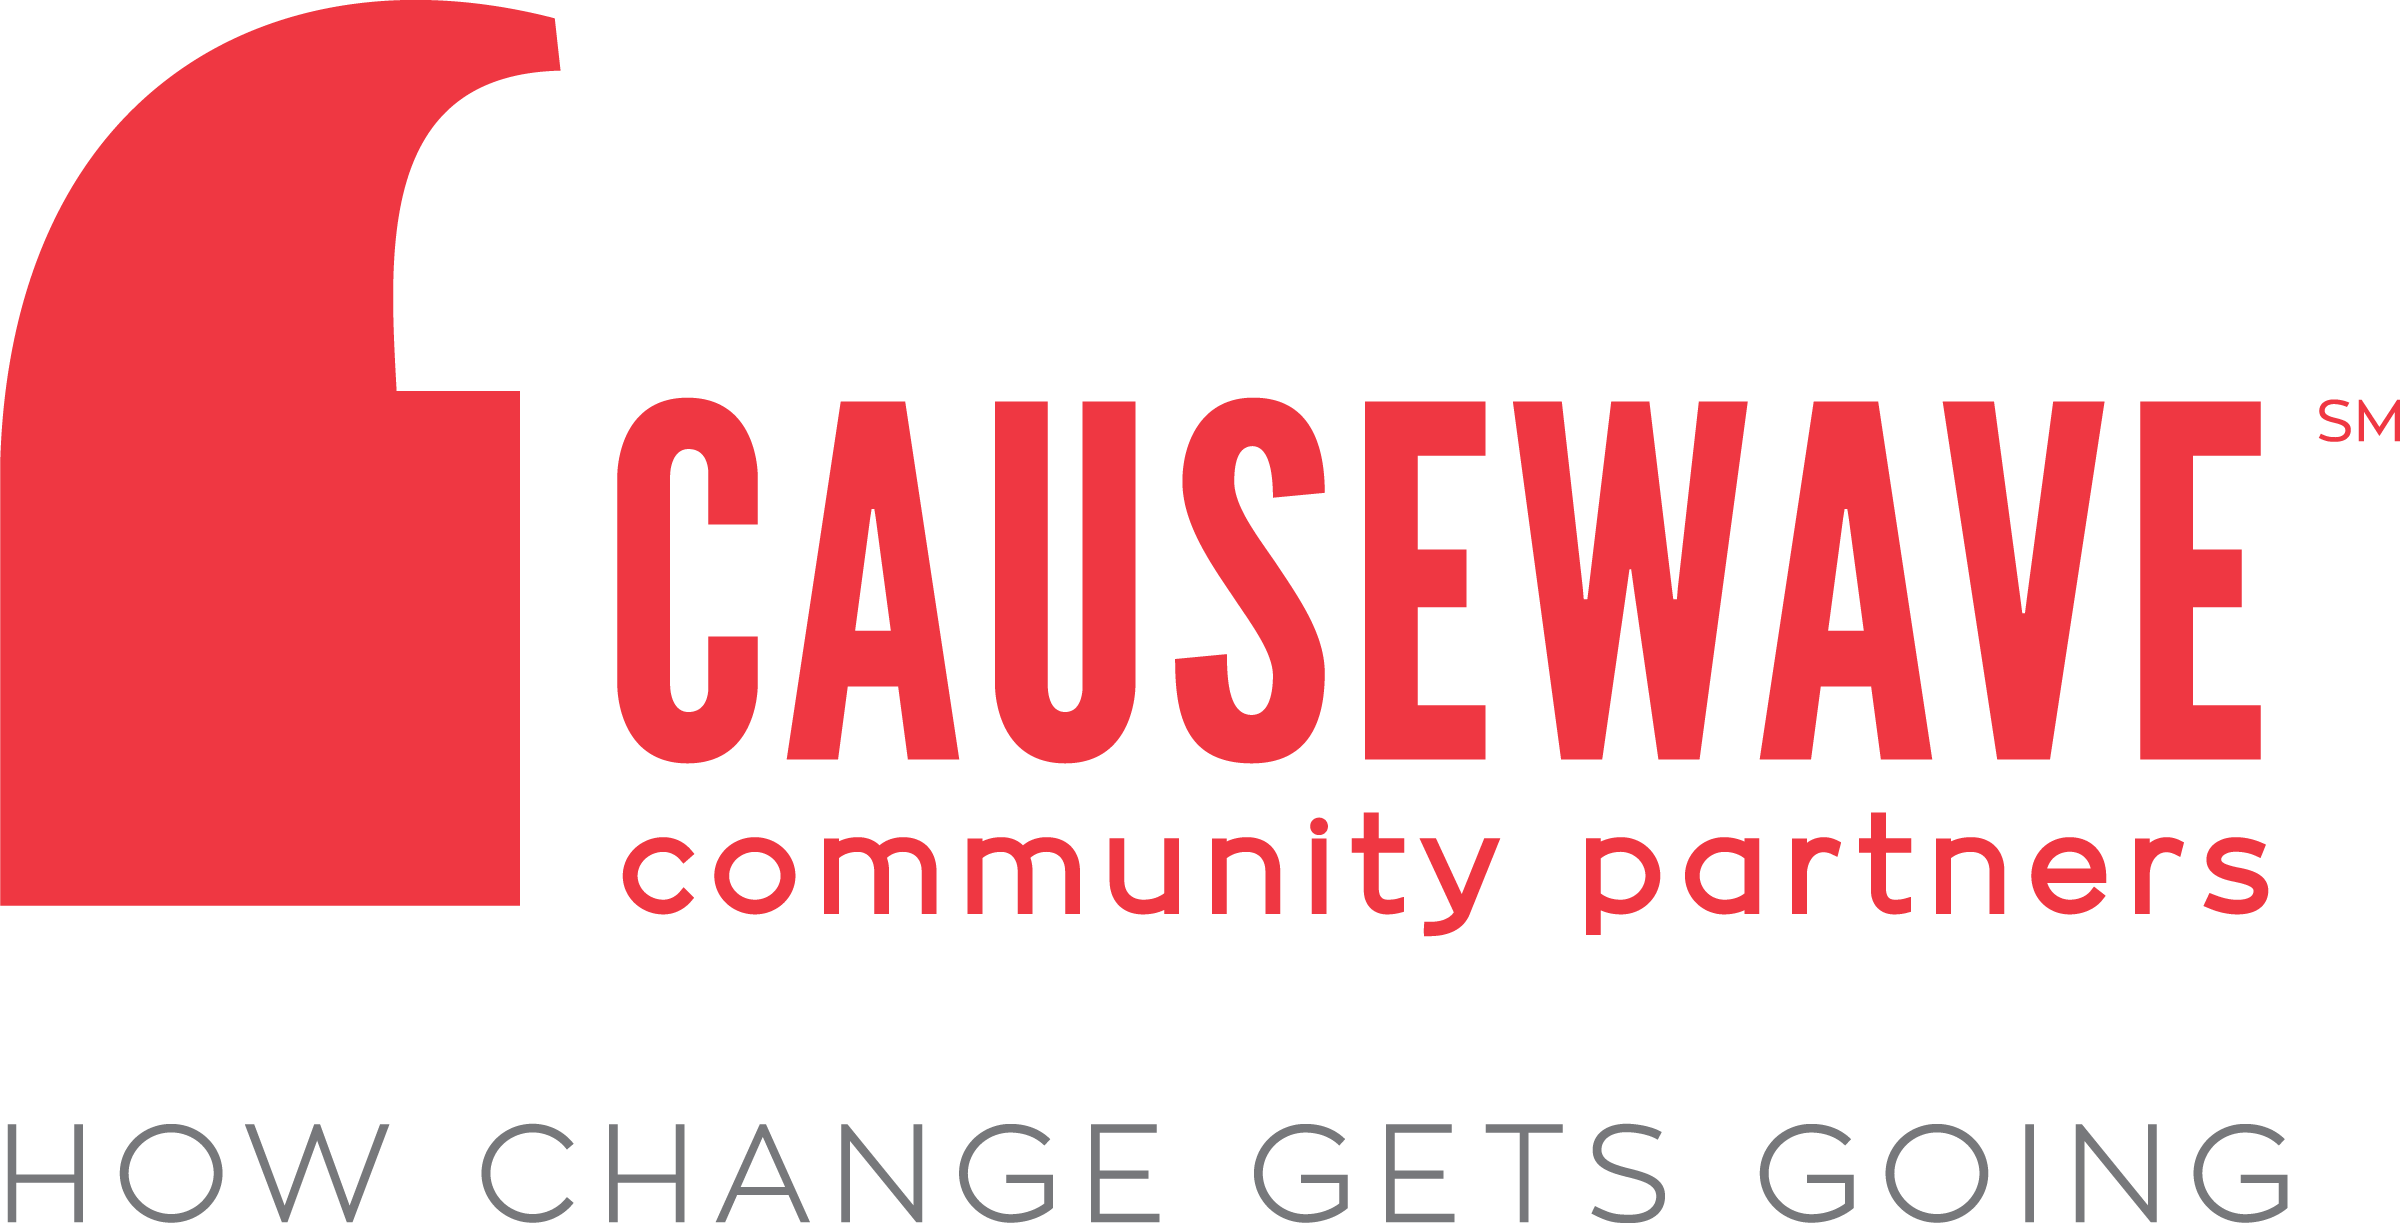 Causewave Community Partners_HorizontalWTag_PRIMARY (1).png